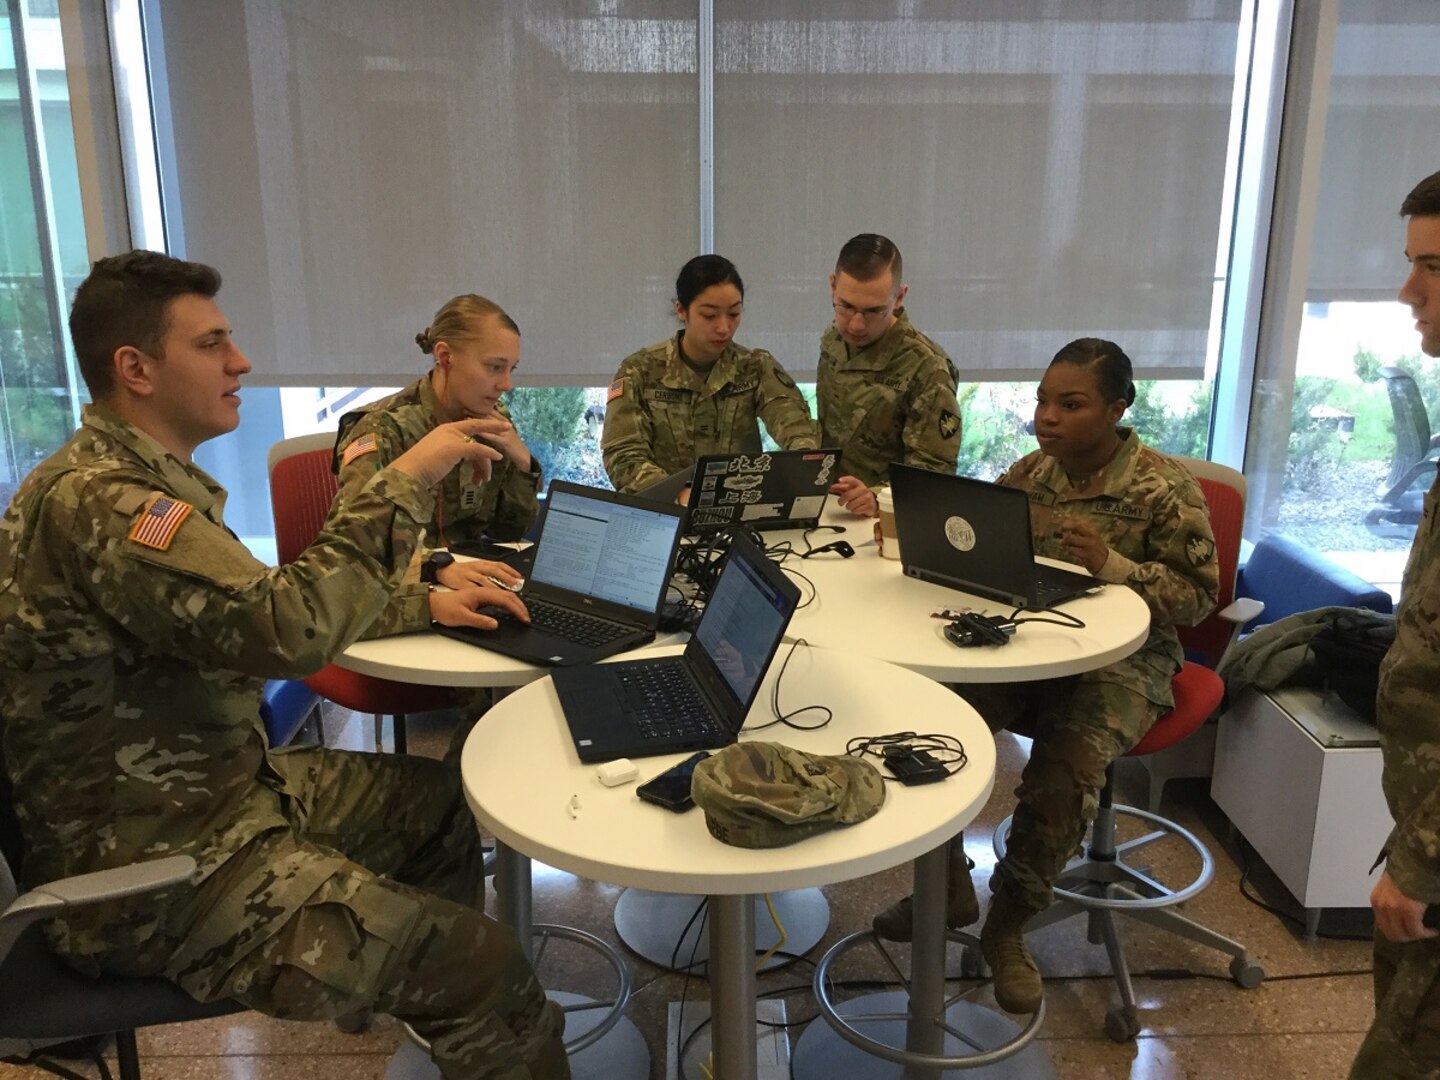 U.S. Military Academy Cadets competing in the data analysis challenge at NSA's NCX 2019.